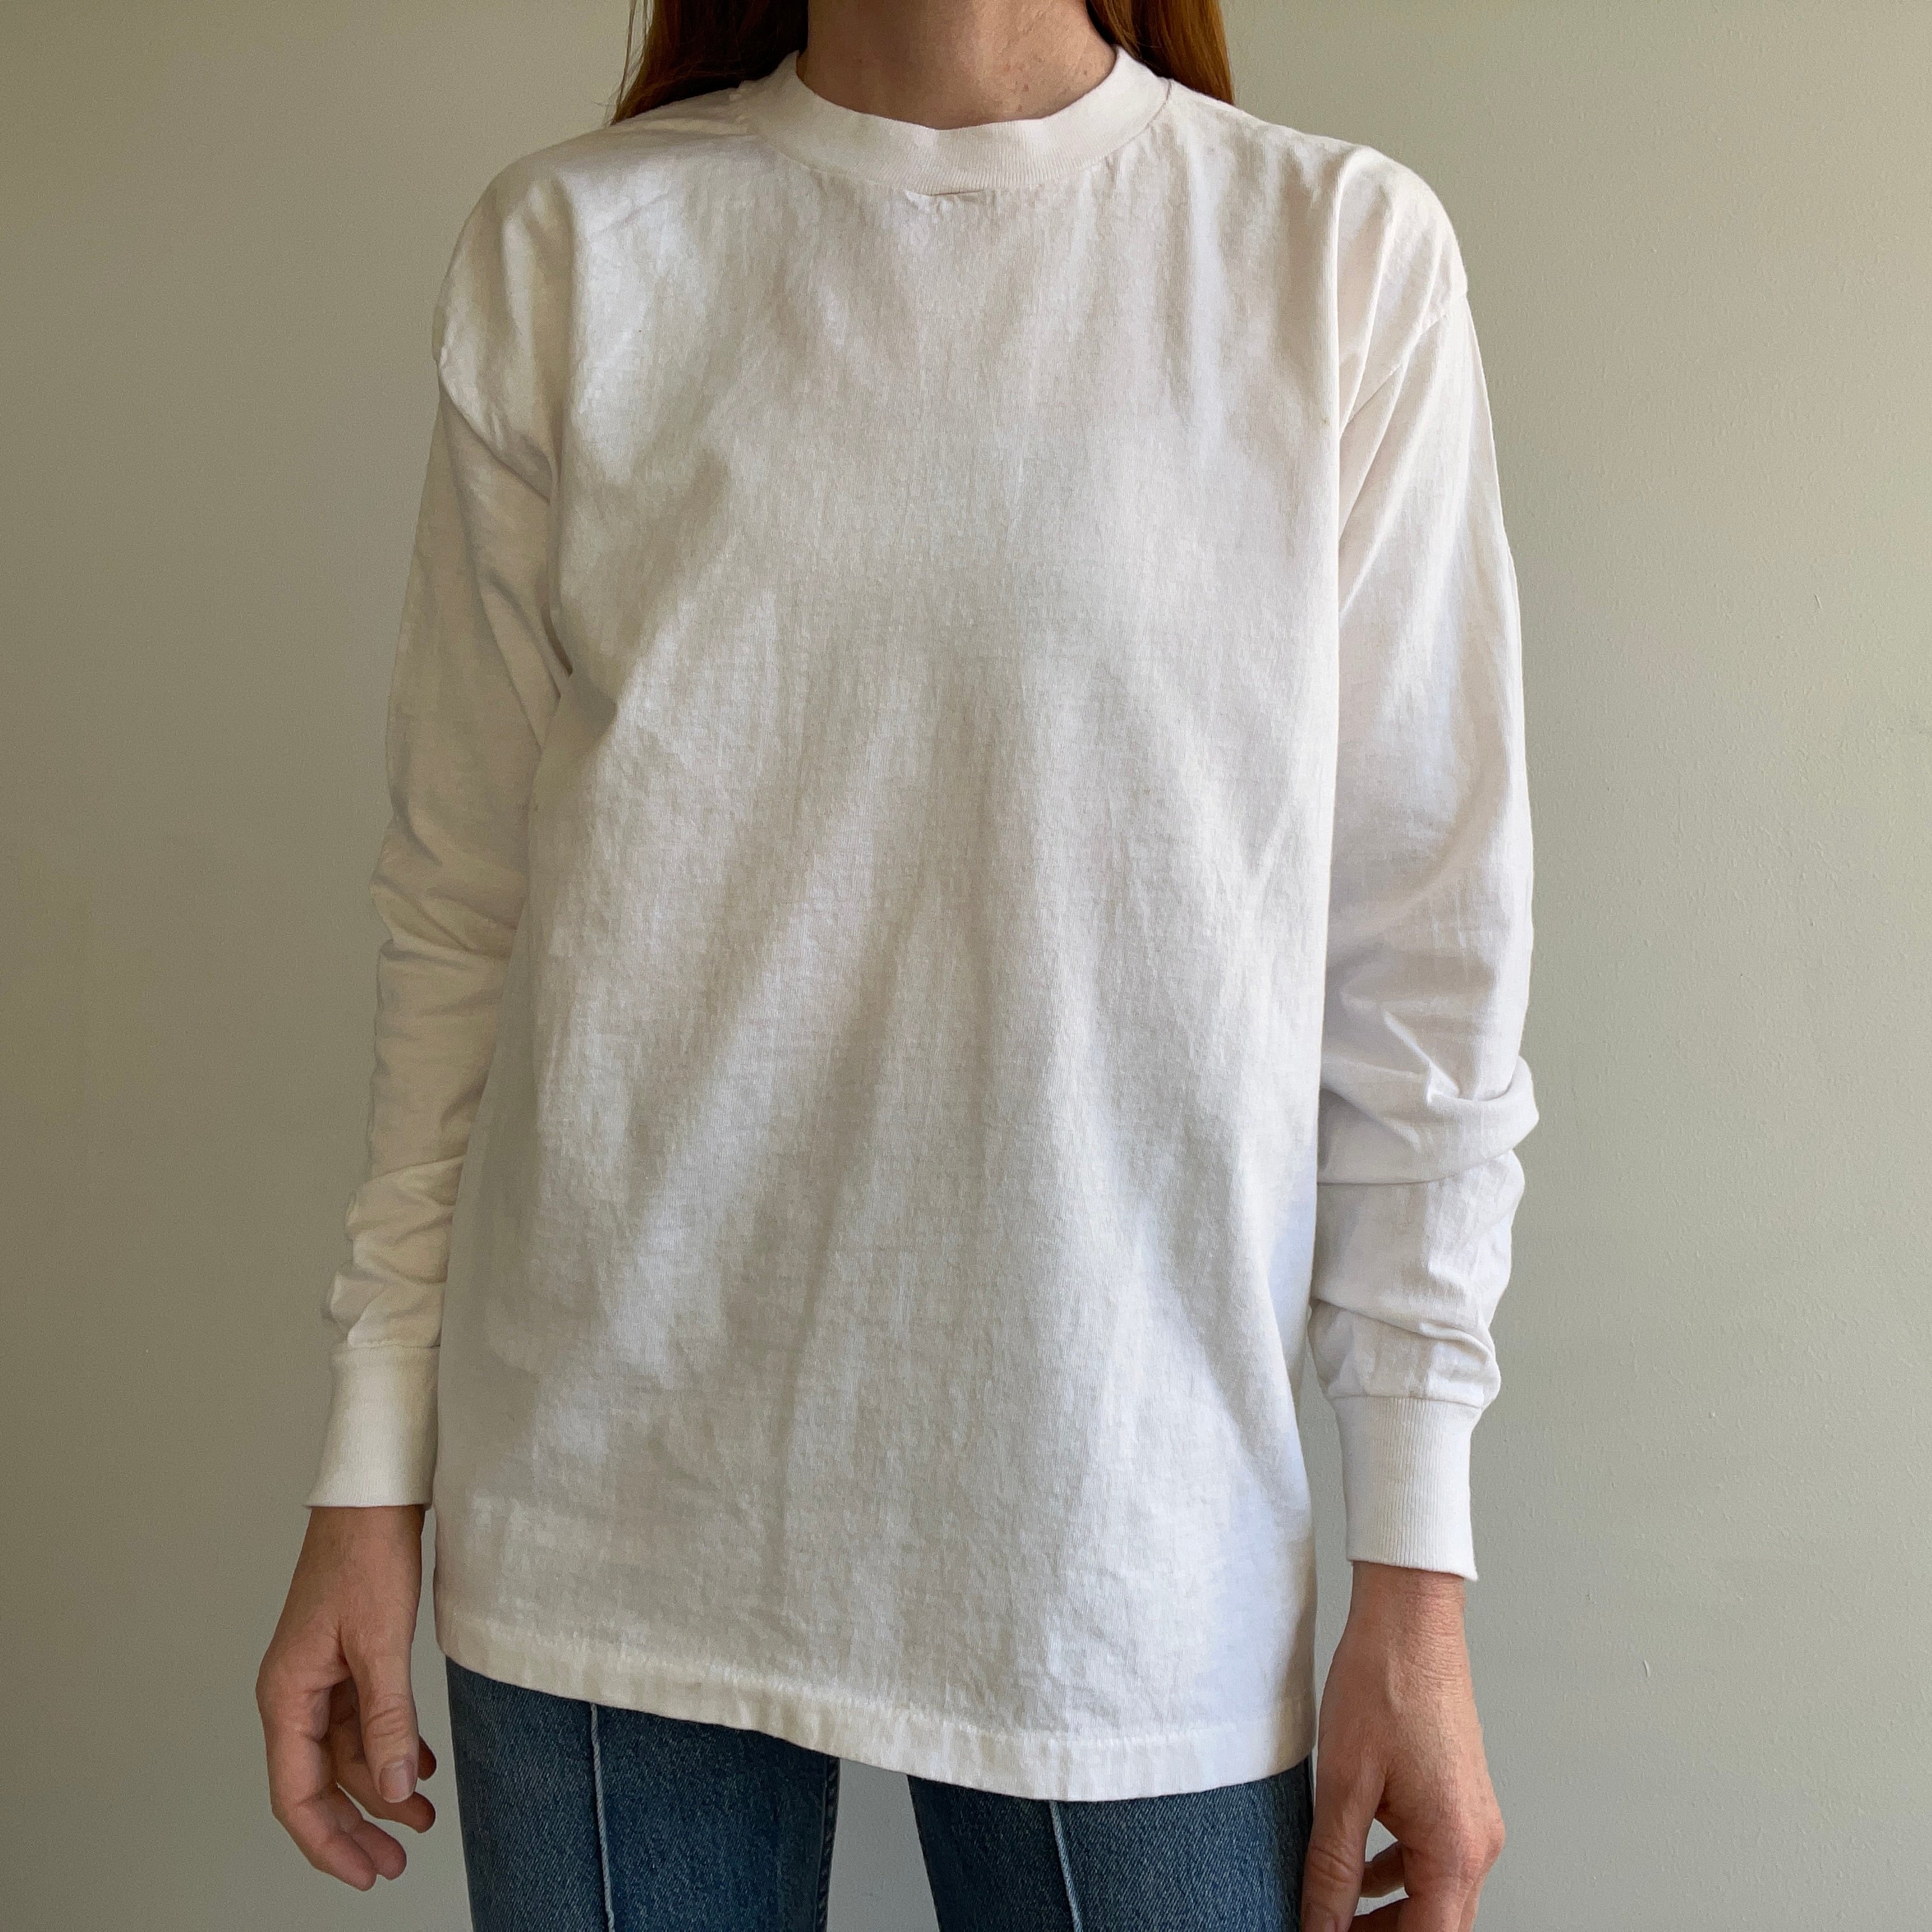 1980s 3D Emblem Blank White Long Sleeve Cotton T-Shirt with Stains